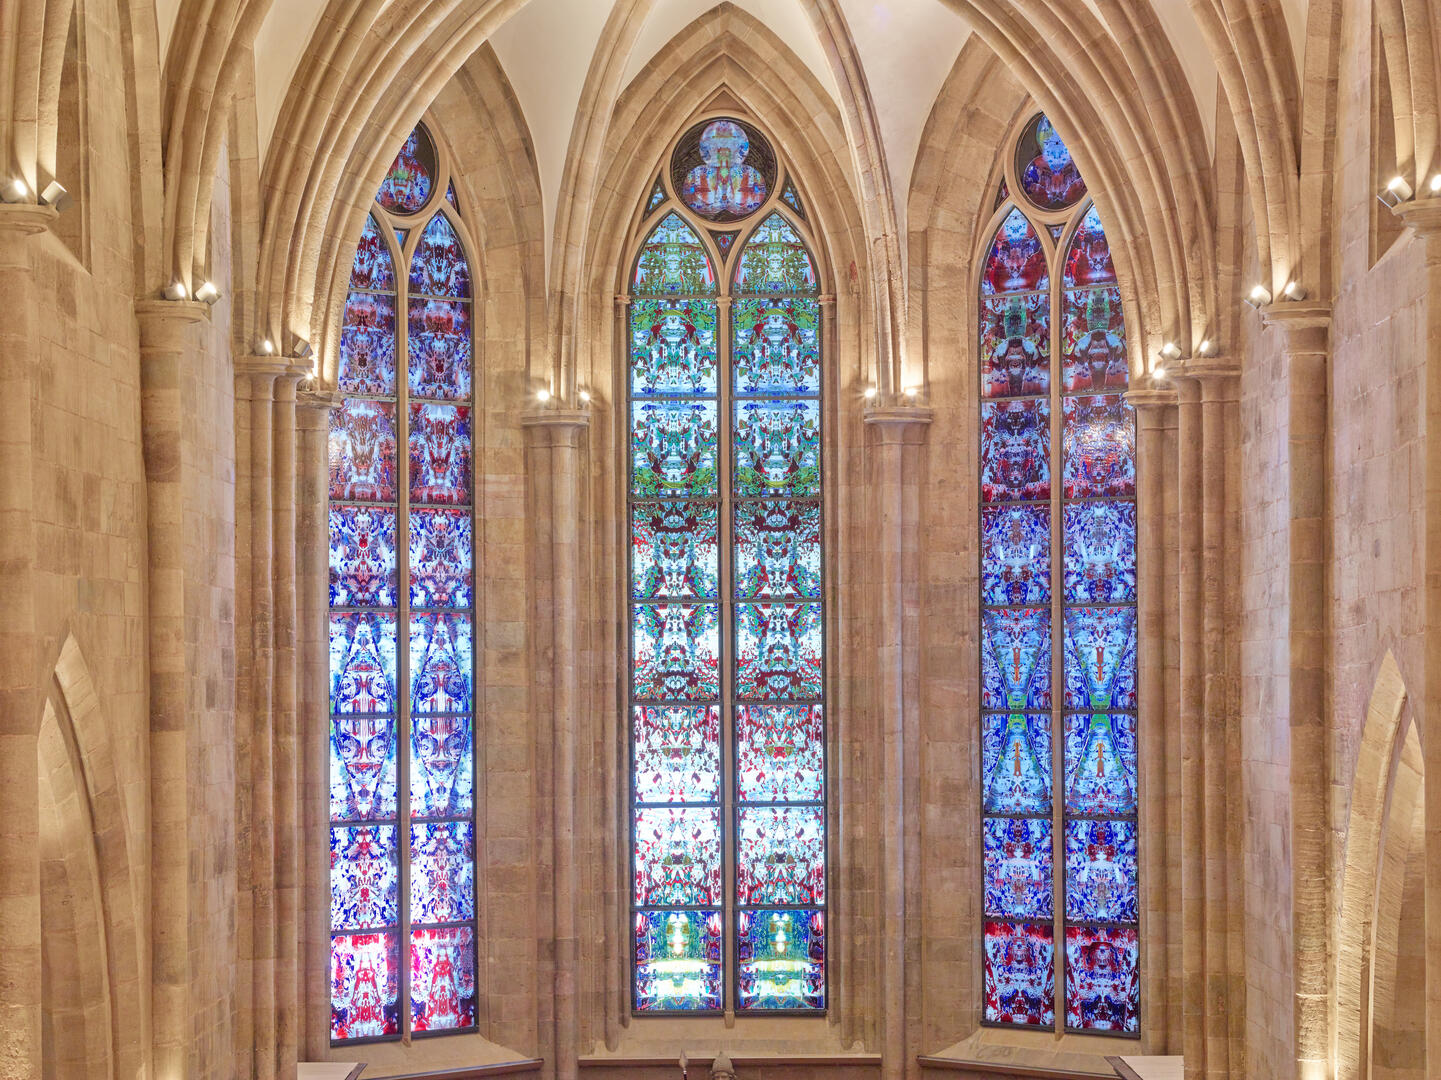 The three Richter choir windows at Tholey Abbey, with designs like a Persian rug or kaleidescope; the far left window mostly pinks, blues and purples; the middle of greens, reds and blues; the right of similar coloring to the left, but deeper hues, and bits of green